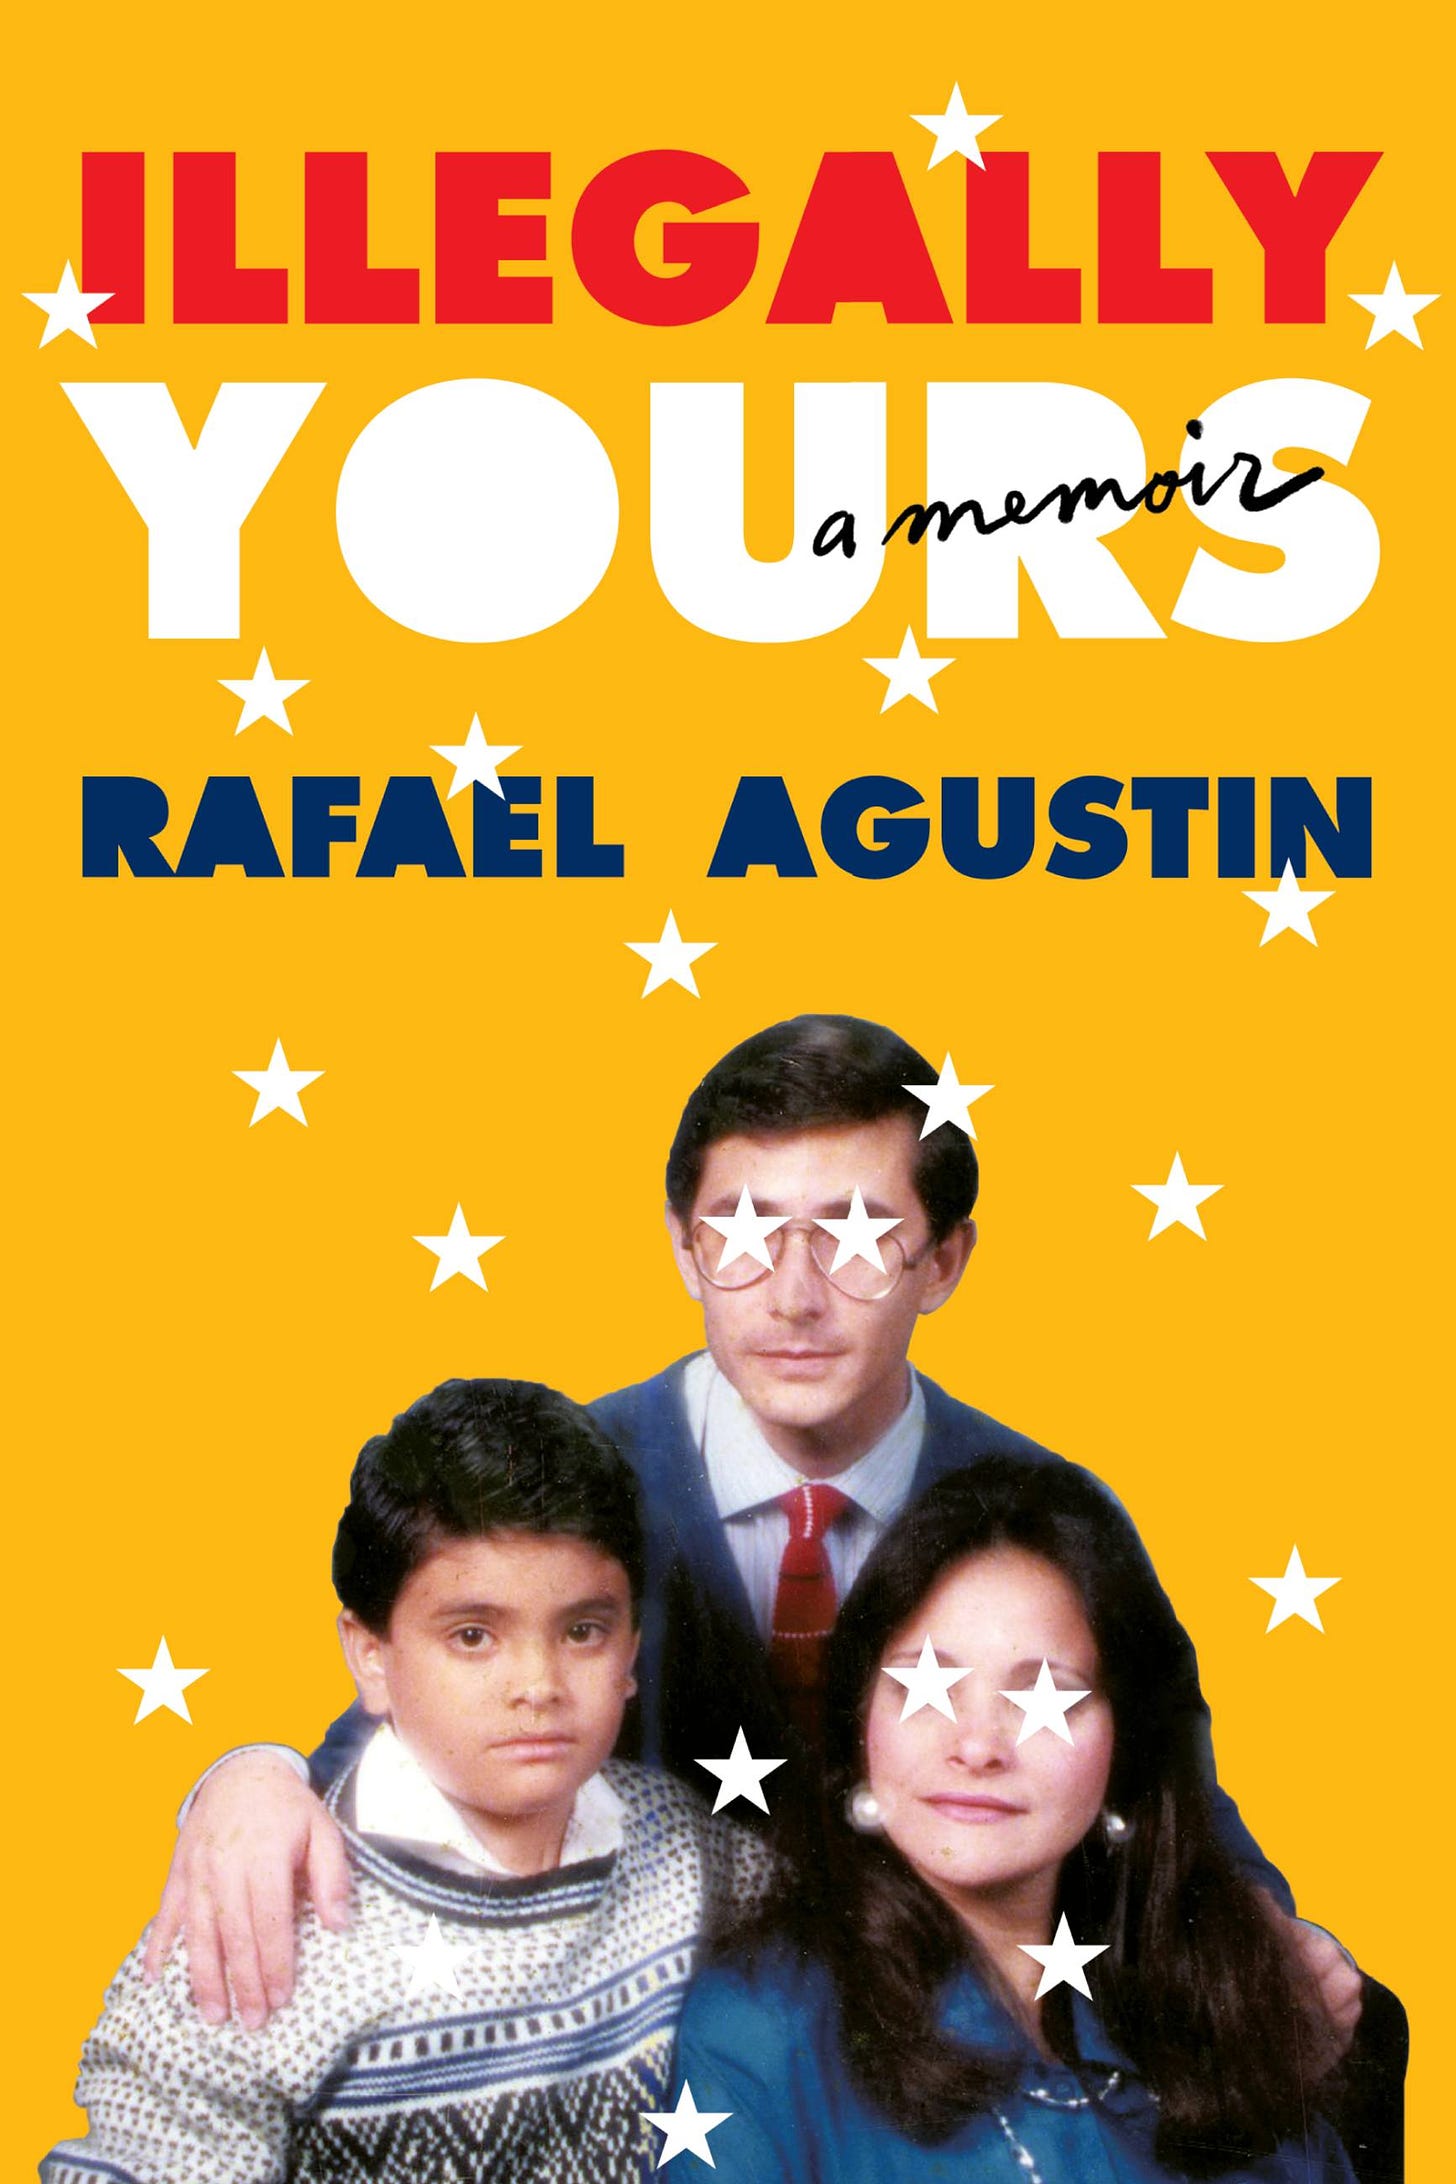 Illegally Yours by Rafael Agustin | Hachette Book Group